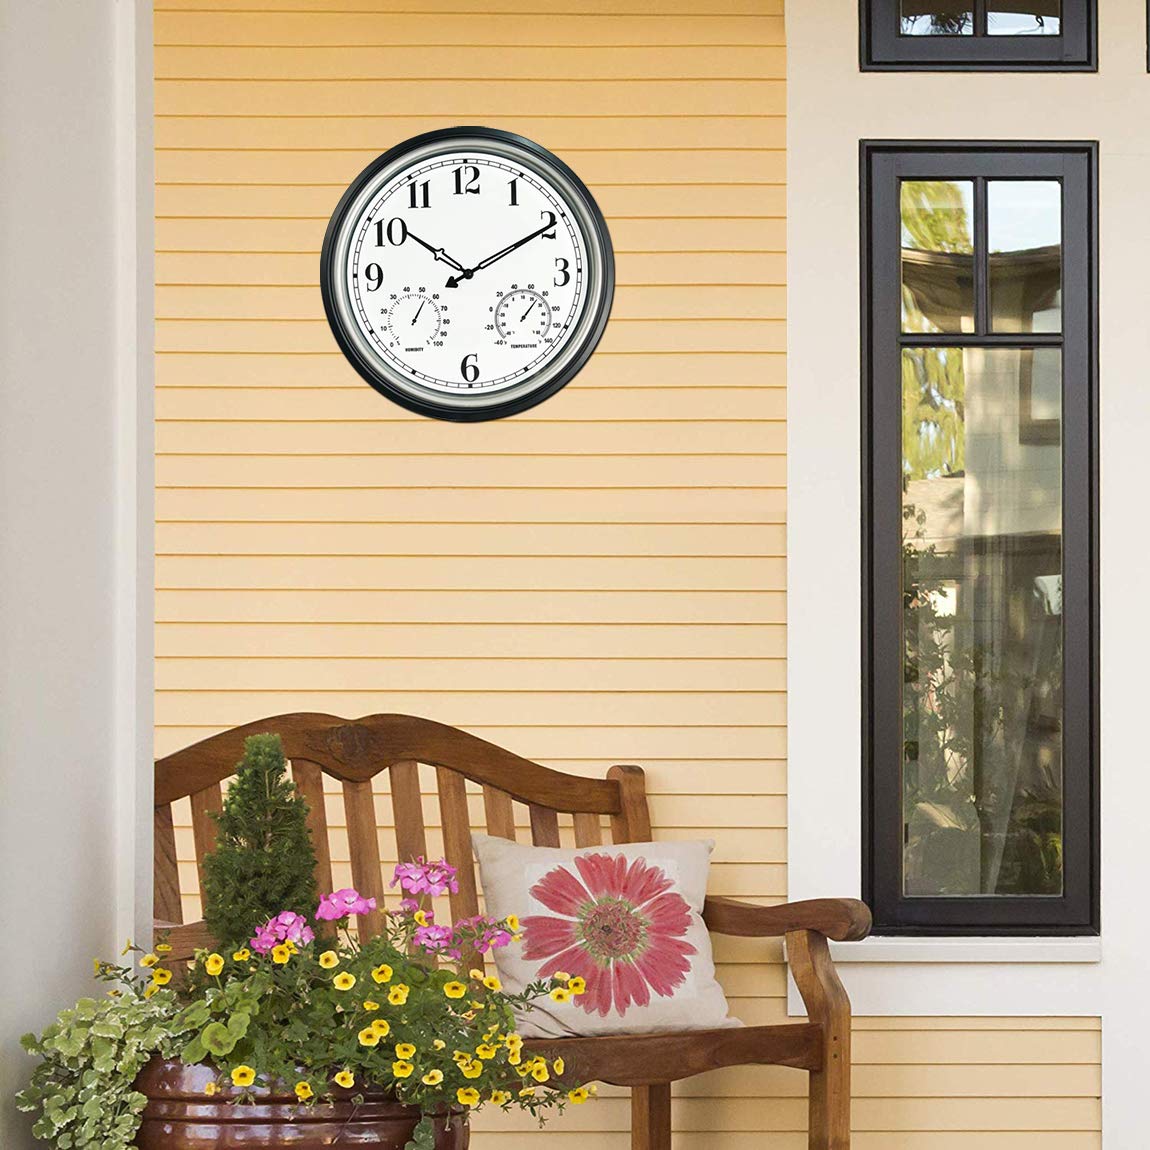 Rsobl 16 Inch Large Indoor Outdoor Wall Clock,Waterproof Non-Ticking Clock with Thermometer and Hygrometer Combo,Battery Operated Clock Wall Decorative- Silver